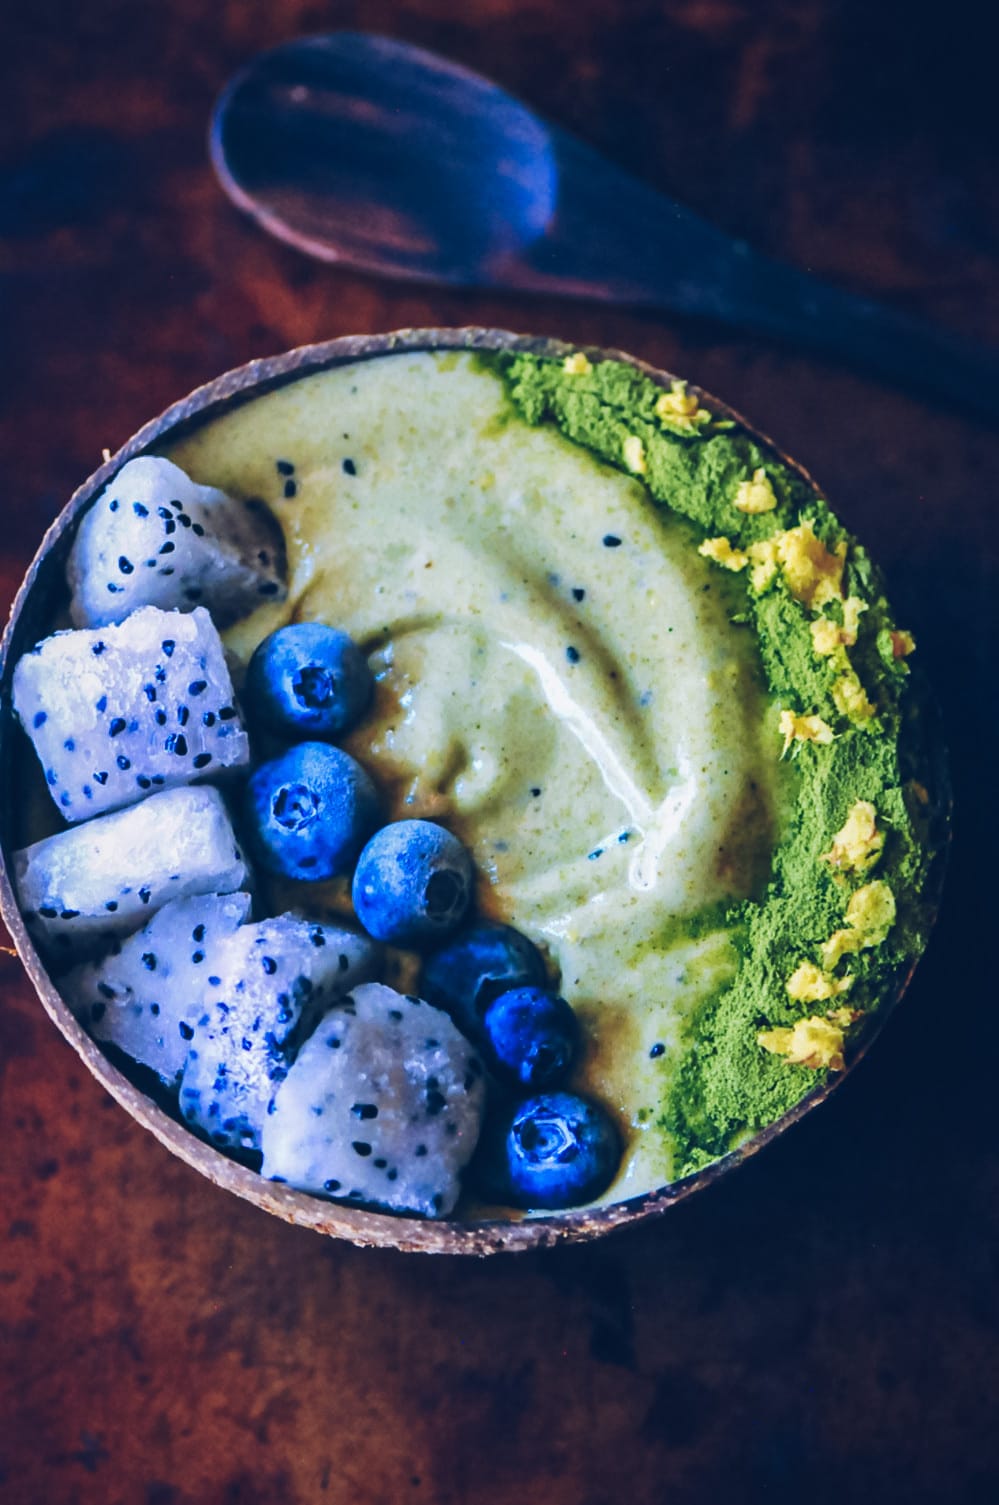  This beautiful and scrumptious Green Ginger Dragon Fruit Smoothie Bowl has a creamy and luscious texture and a delightfully fruity flavor with a touch of ginger kick! Vegan, gluten-free, refreshing, healthy, and easy to make, too! #smoothiebowl #greensmoothiebowl #dragonfruitsmoothie #dragonfruitsmoothiebowl #gingersmoothie #vegansmoothiebowl #greennicecream #pitayasmoothiebowl 